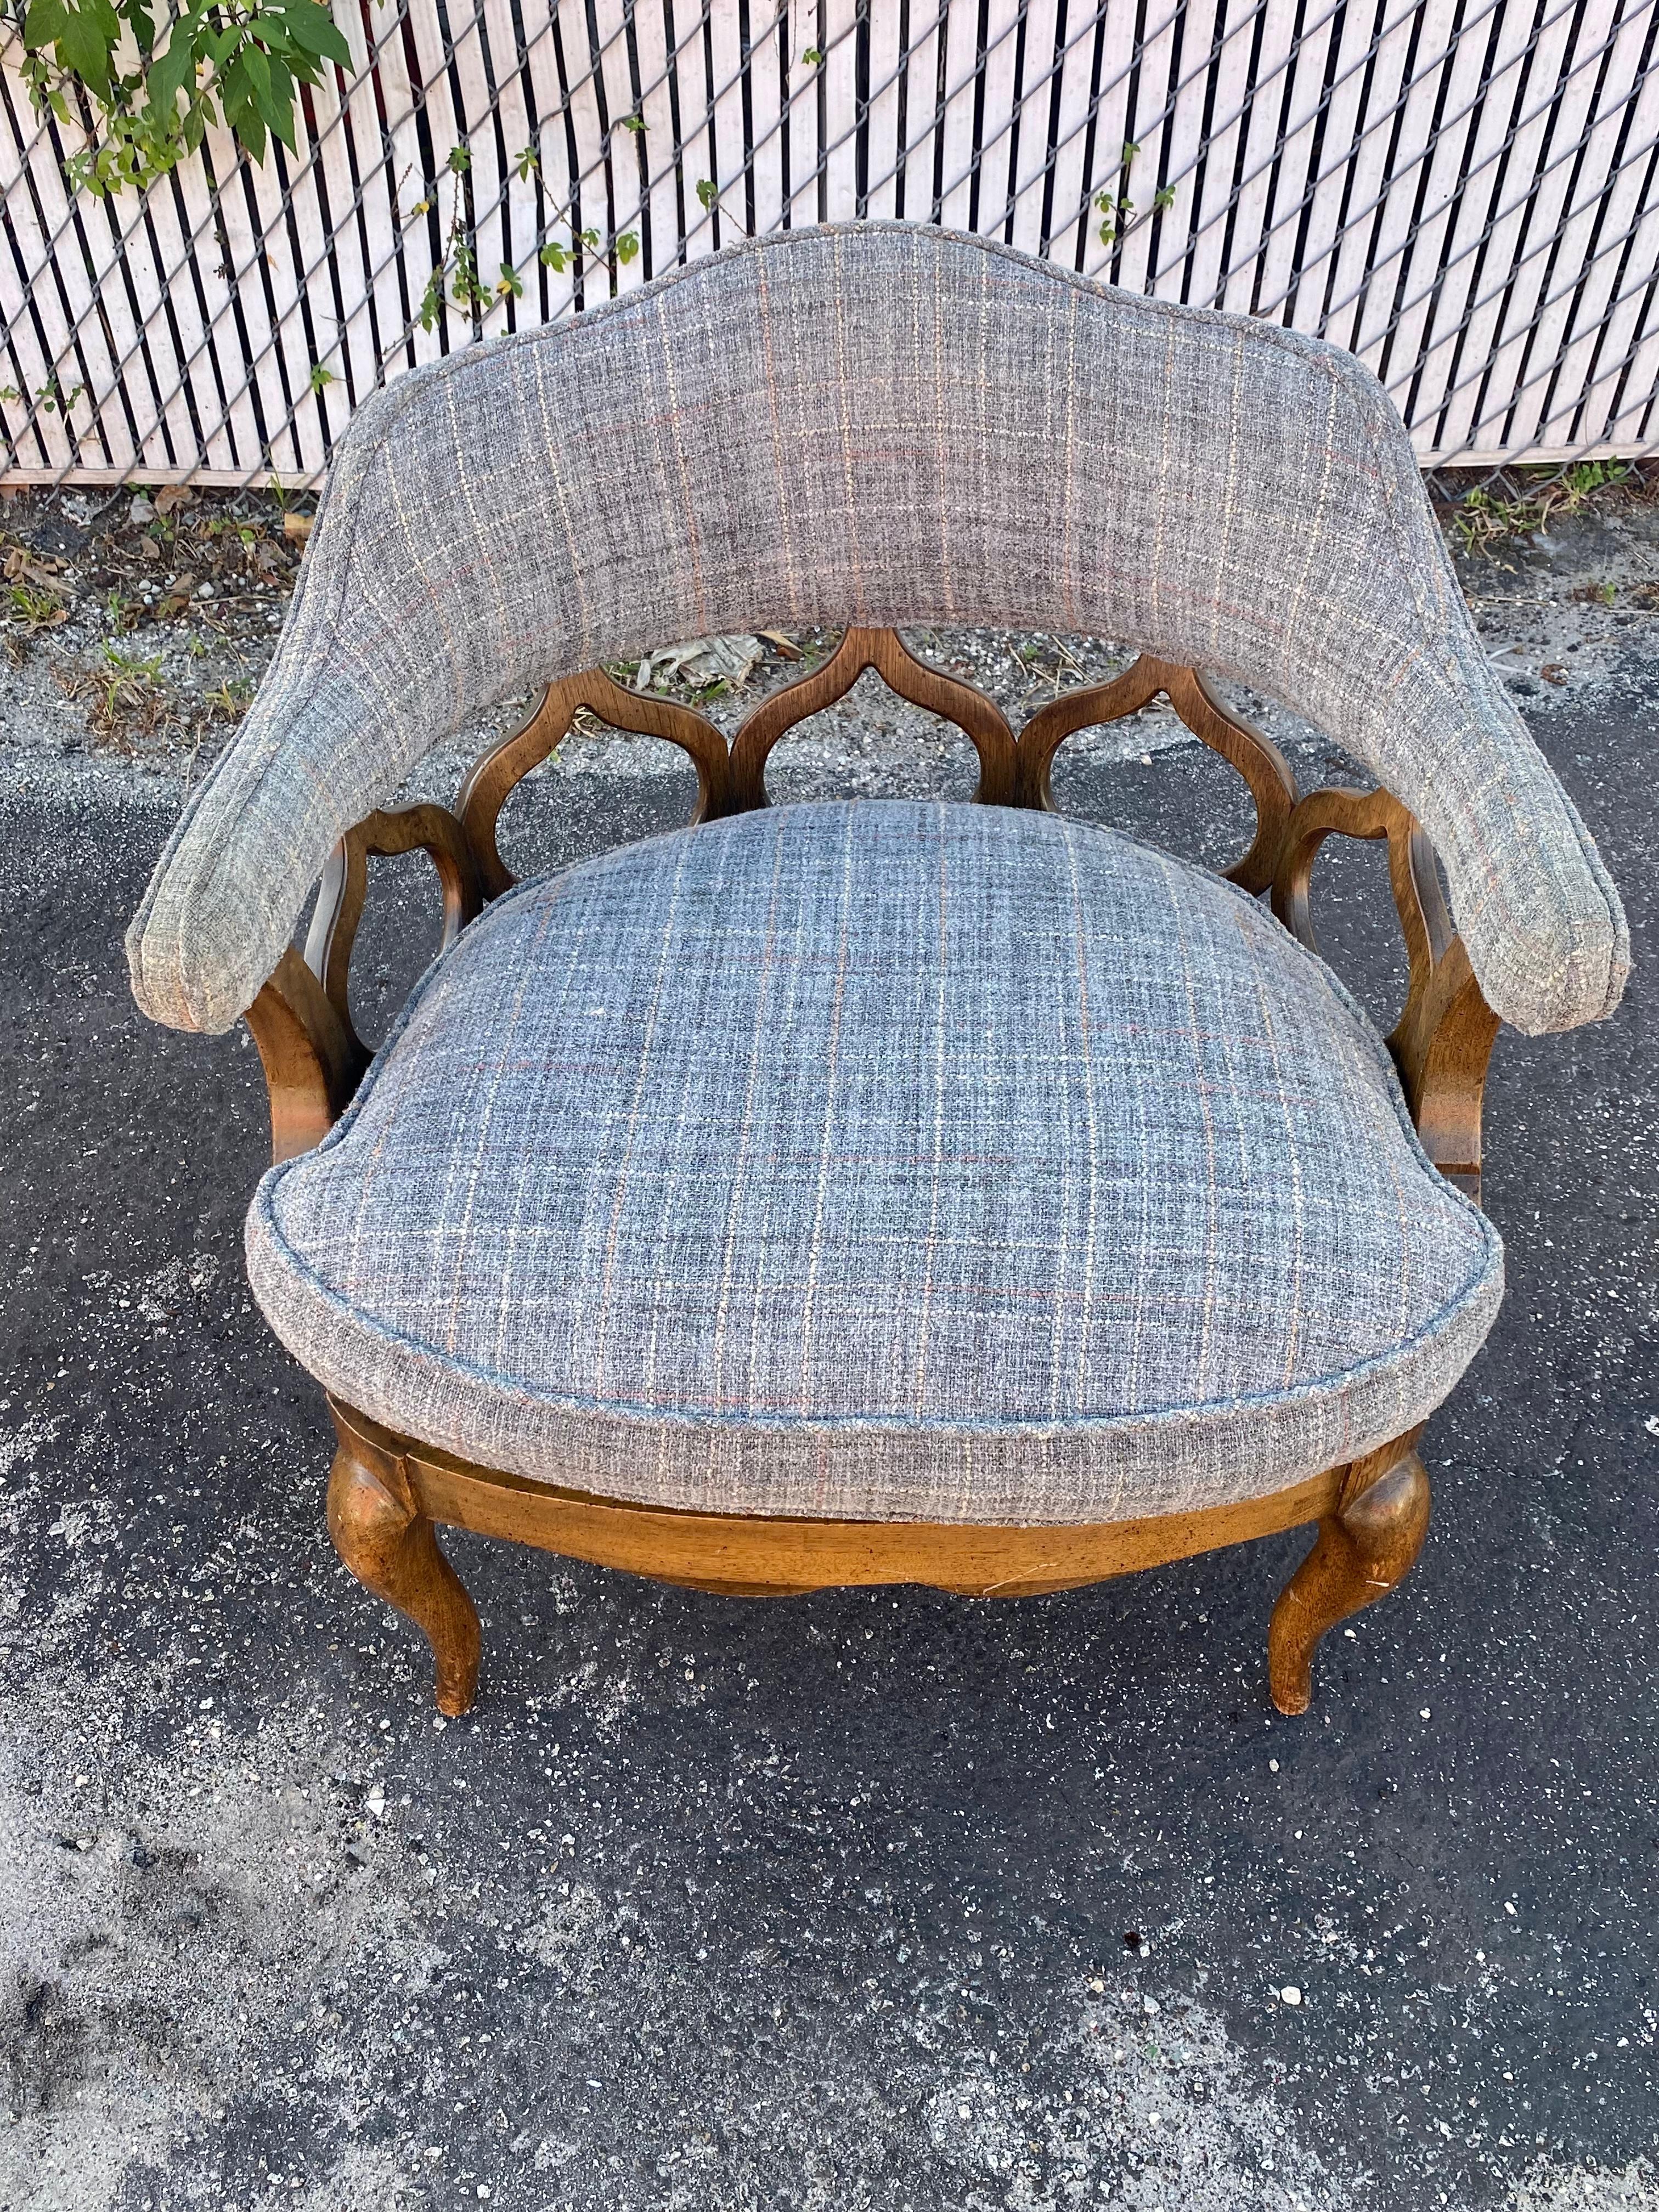 1970s  Mid Century Sculptural Curved Barrel Tweed Wood Chairs, Set of 2 For Sale 5